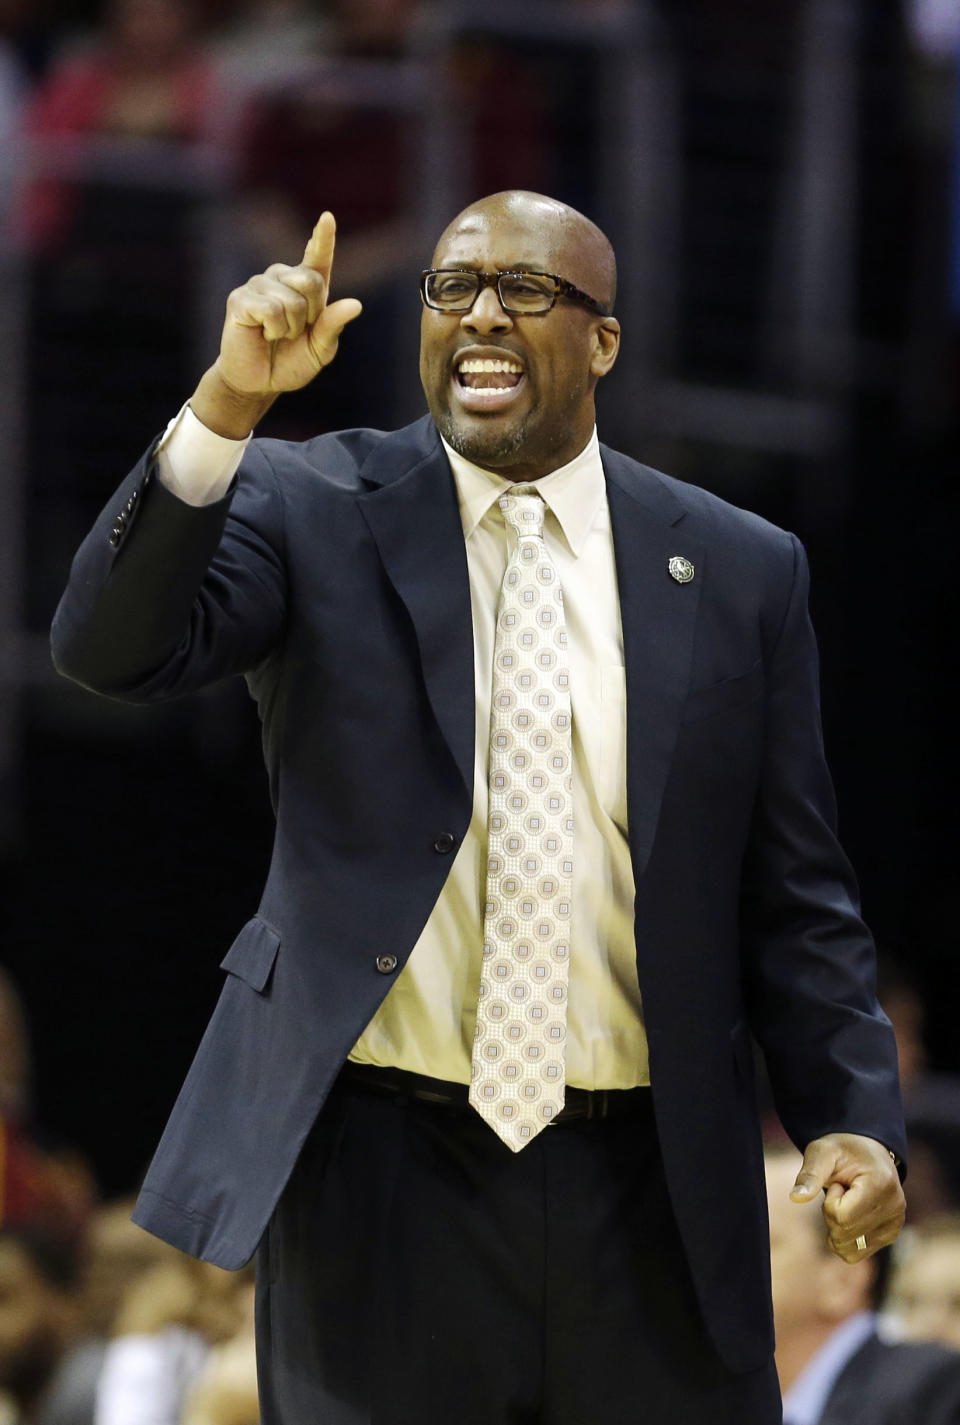 In this April 5, 2014 photo, Cleveland Cavaliers head coach Mike Brown yells at his team during an NBA basketball game against the Charlotte Bobcats in Cleveland. On Monday, May 12, 2014, the Cavaliers announced Brown has been released as head coach. (AP Photo)